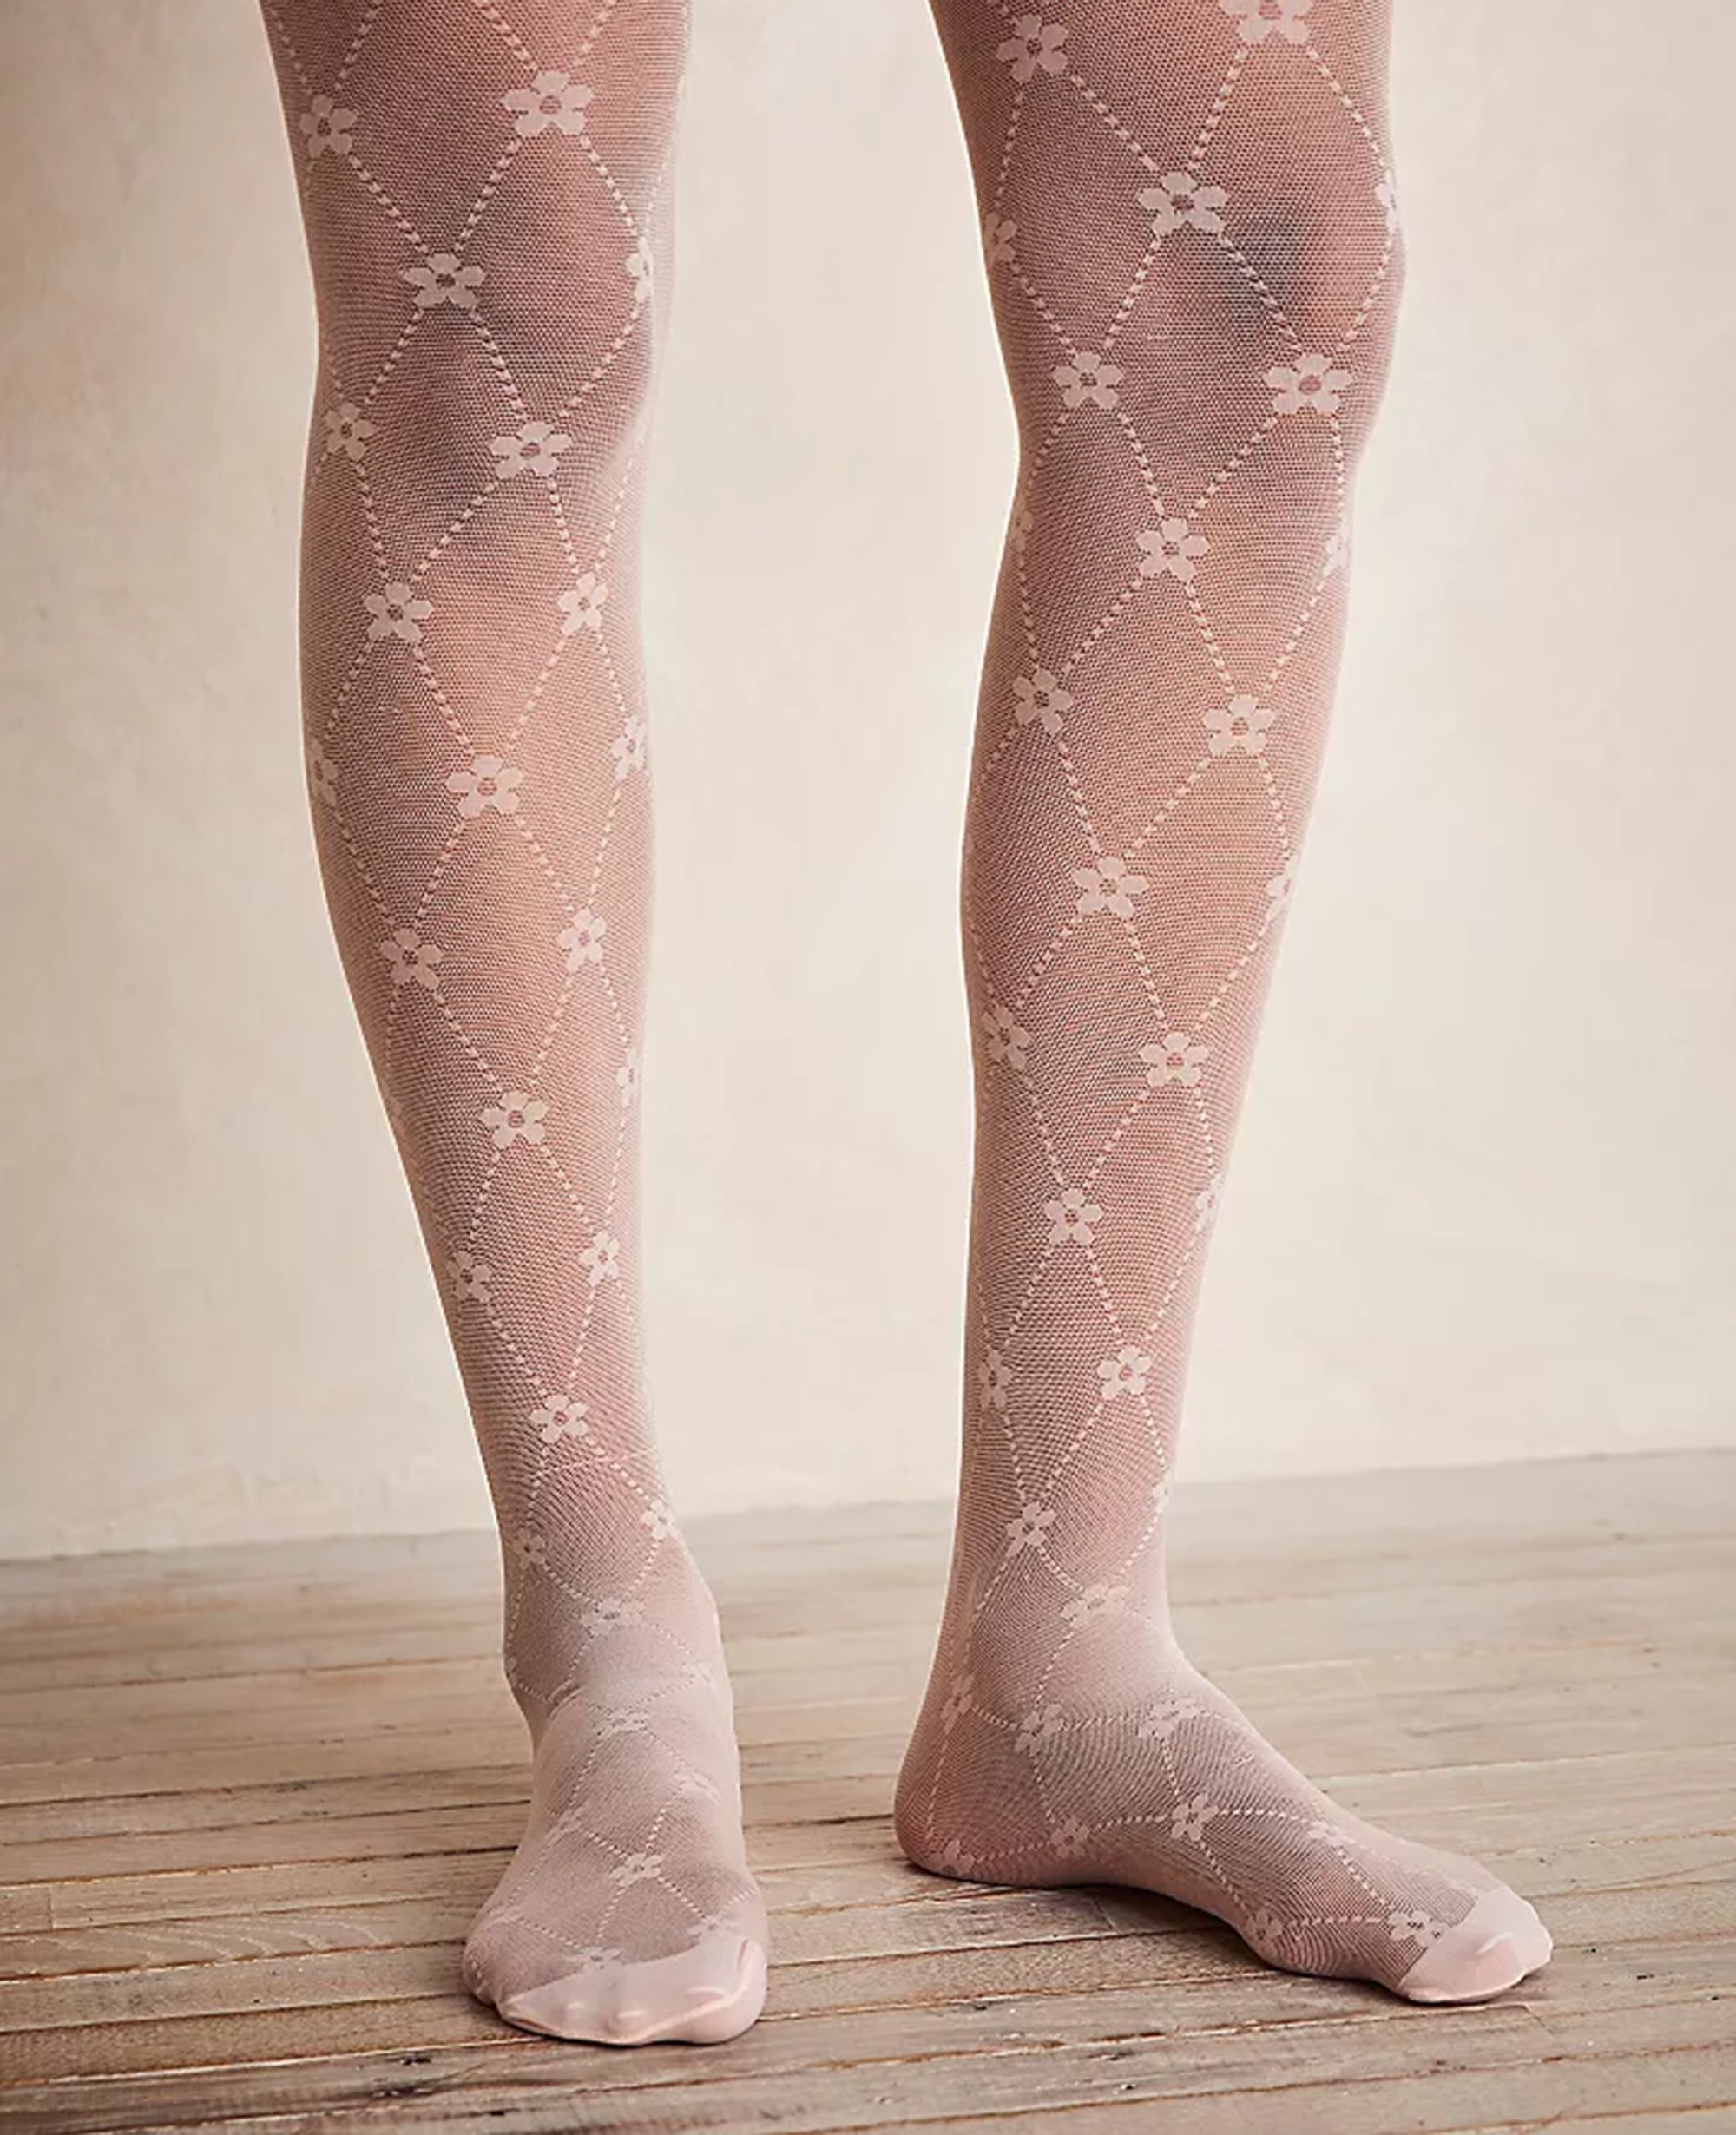 6 Gucci Tights Dupes & Gucci Stockings Look Alikes